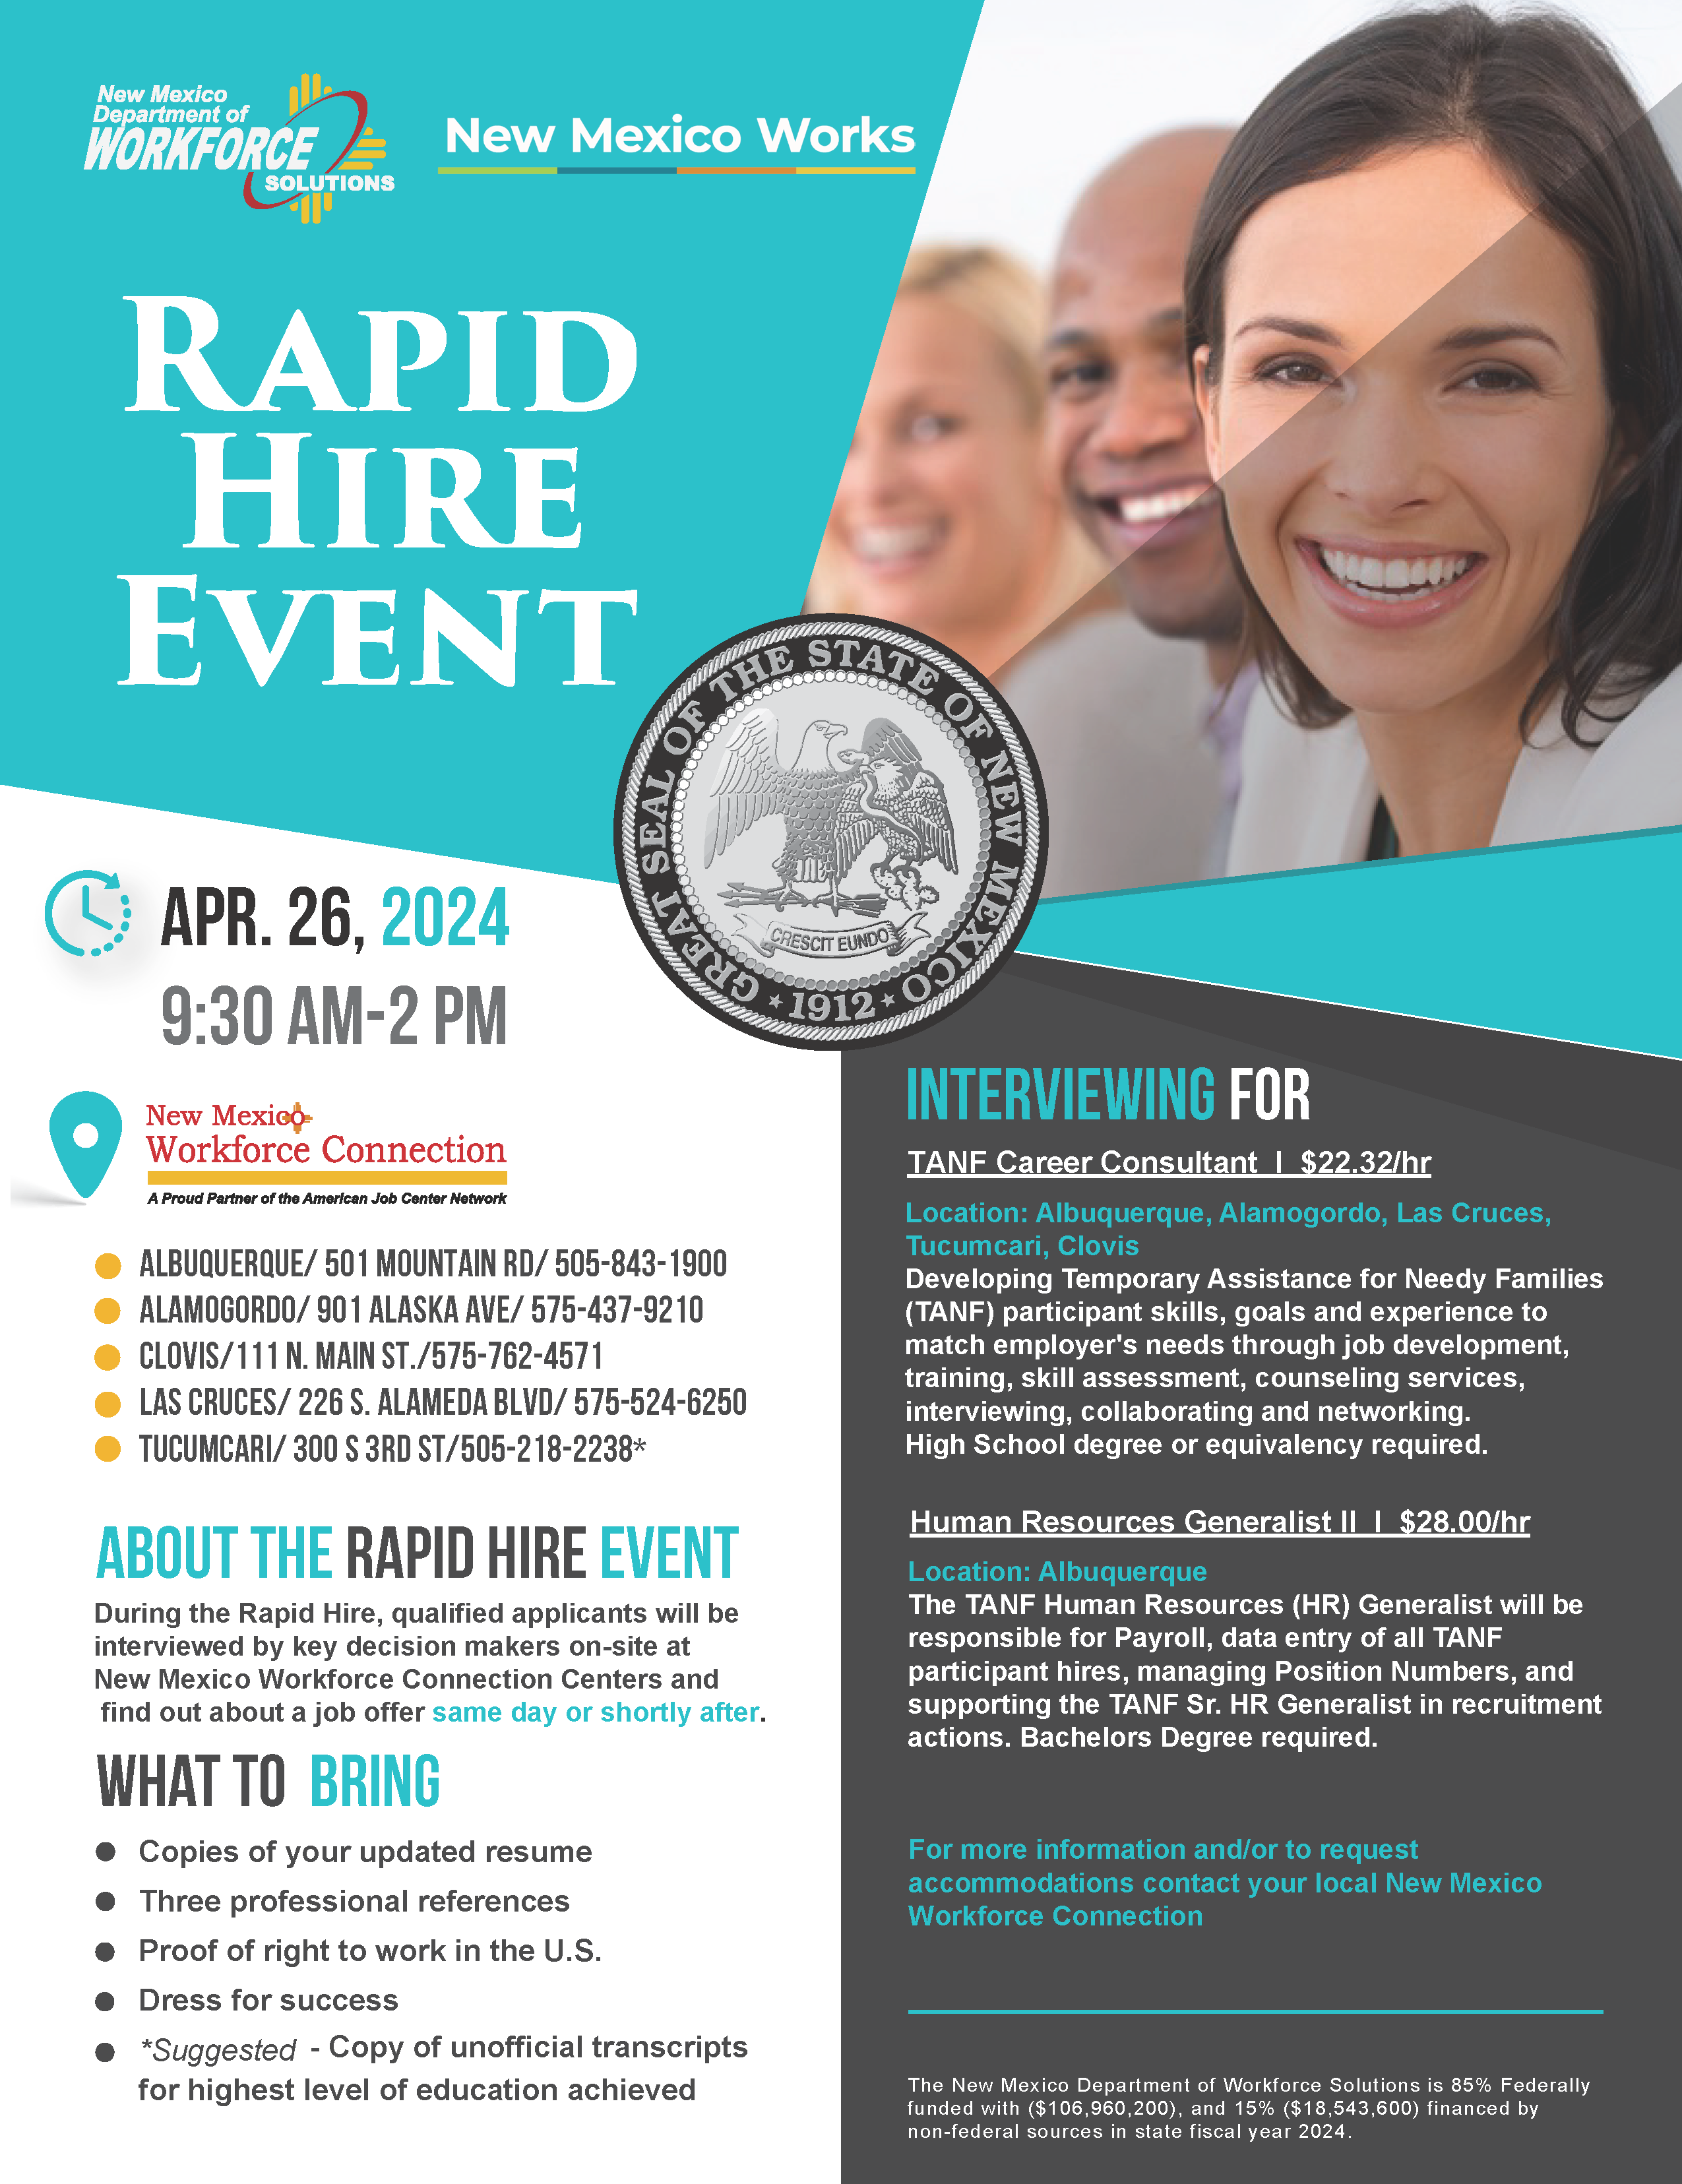 Rapid Hire Event - New Mexico Department of Workforce Solutions